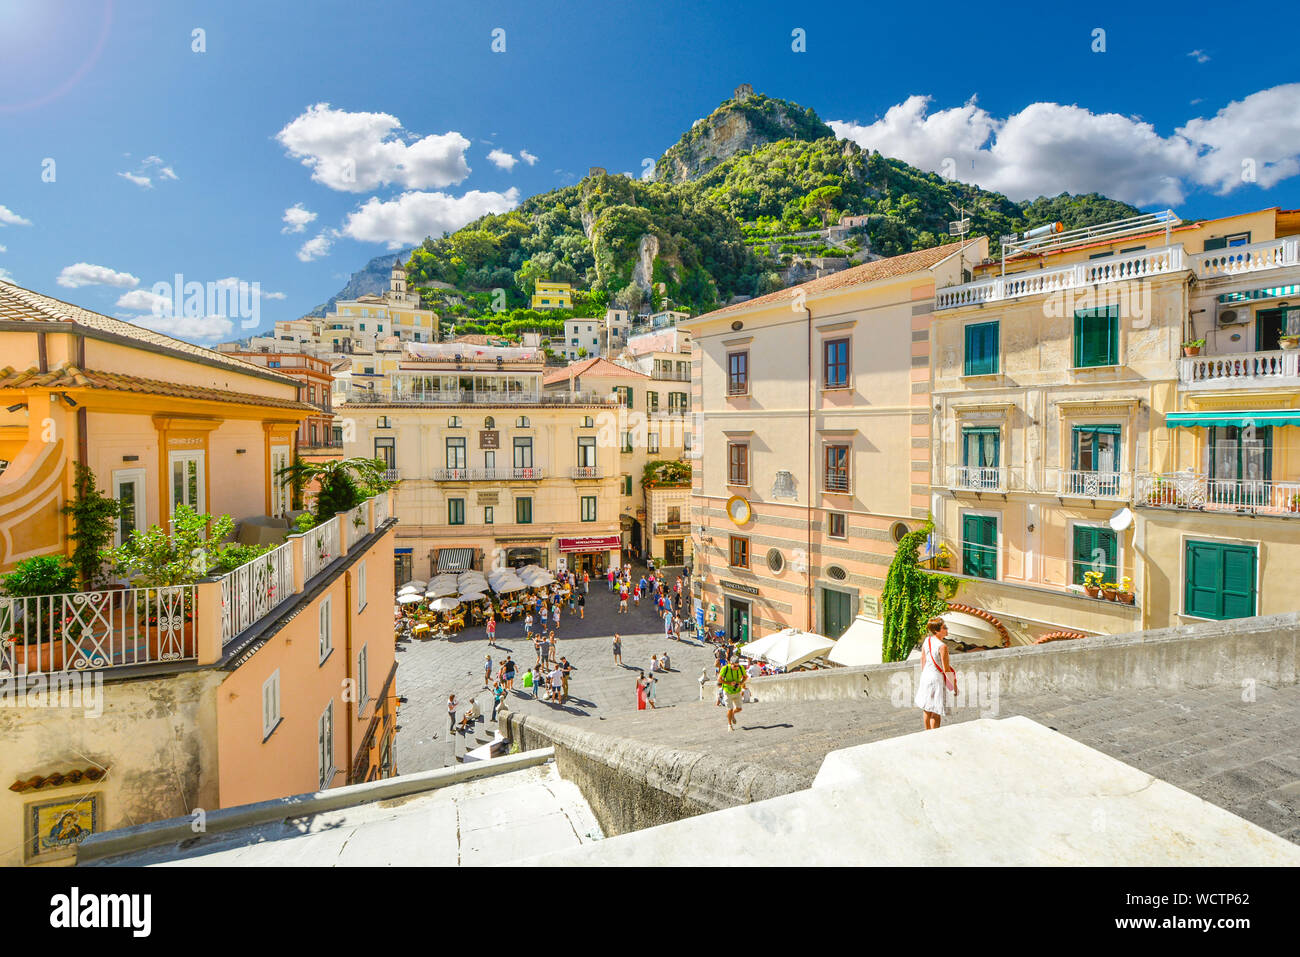 Mountain and city views from the top of the stairs of the Amalfi Cathedral on the Amalfi Coast of Italy with the hilltop Torre dello Ziro fort in view Stock Photo